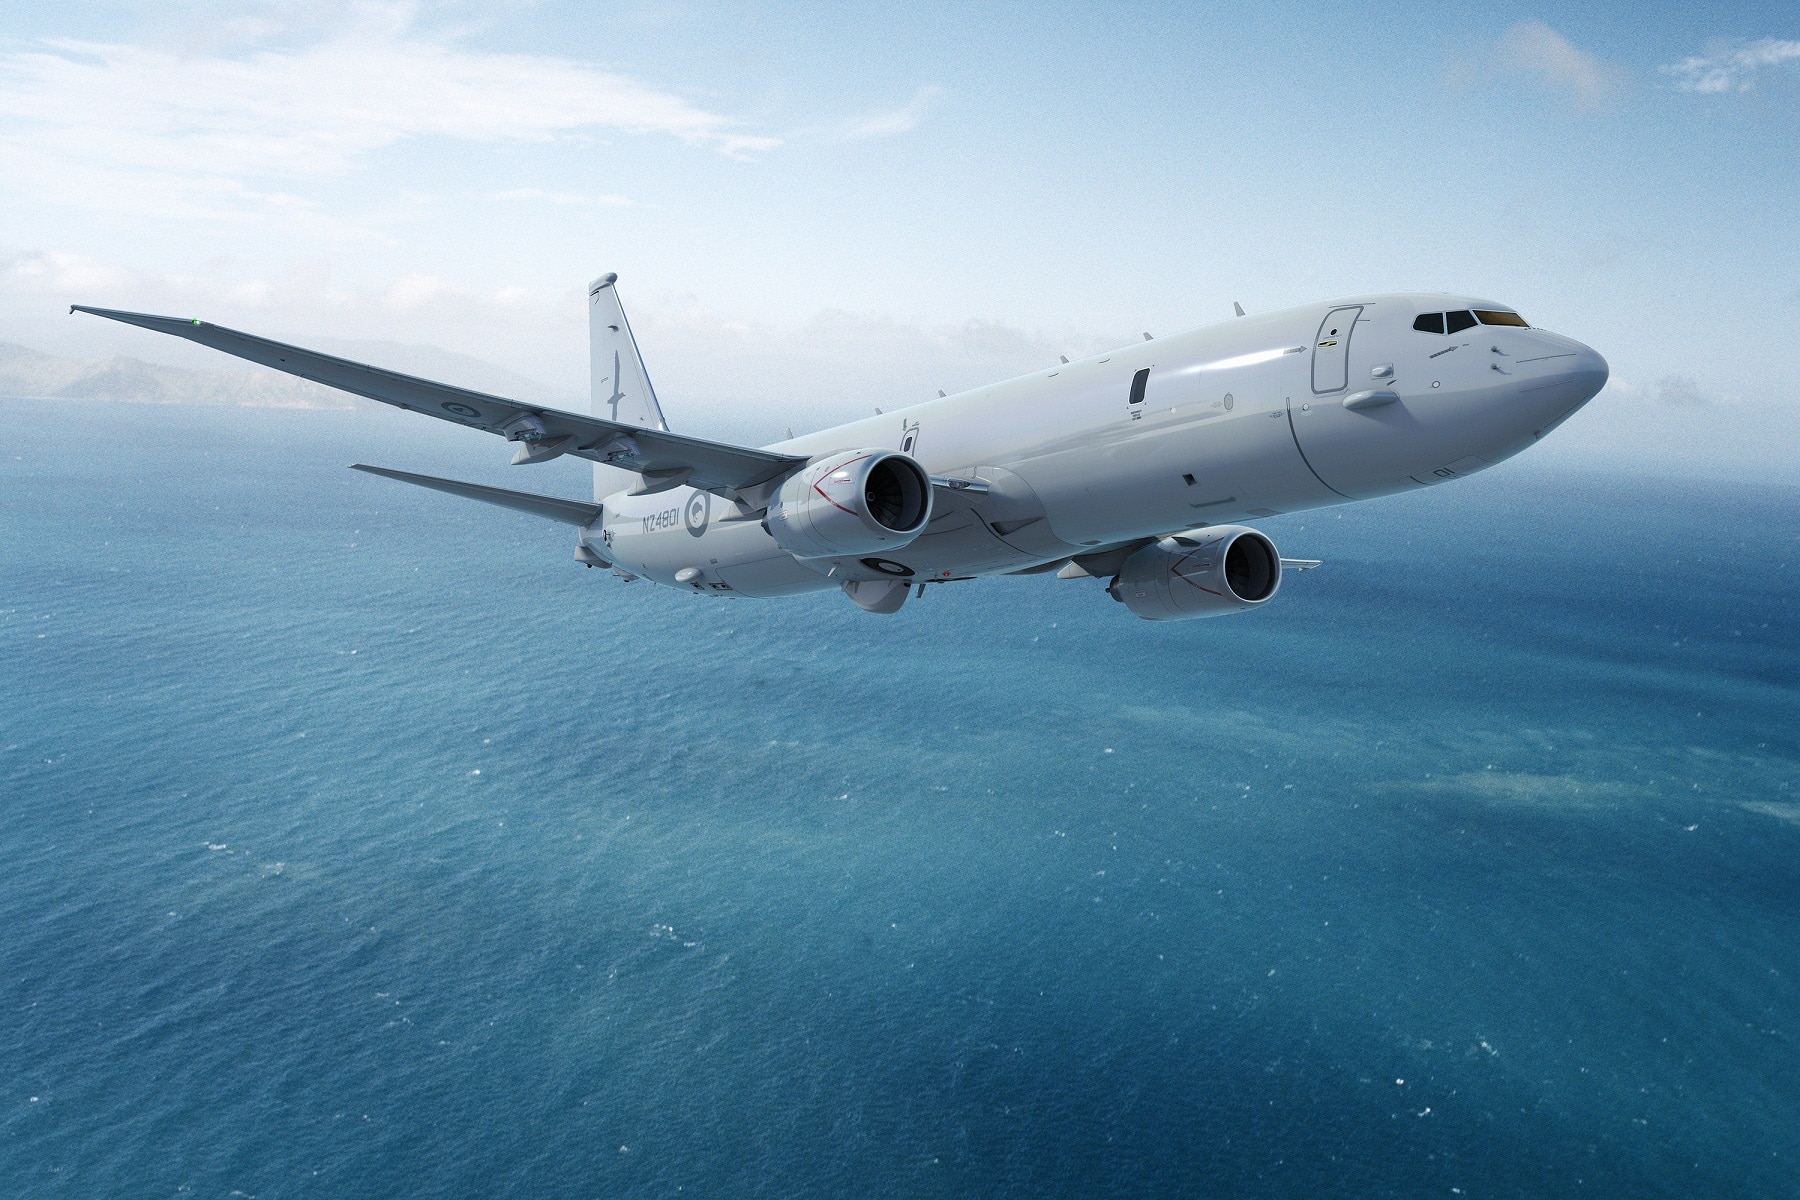 Boeing Begins Build on New Zealand’s First P-8A Aircraft